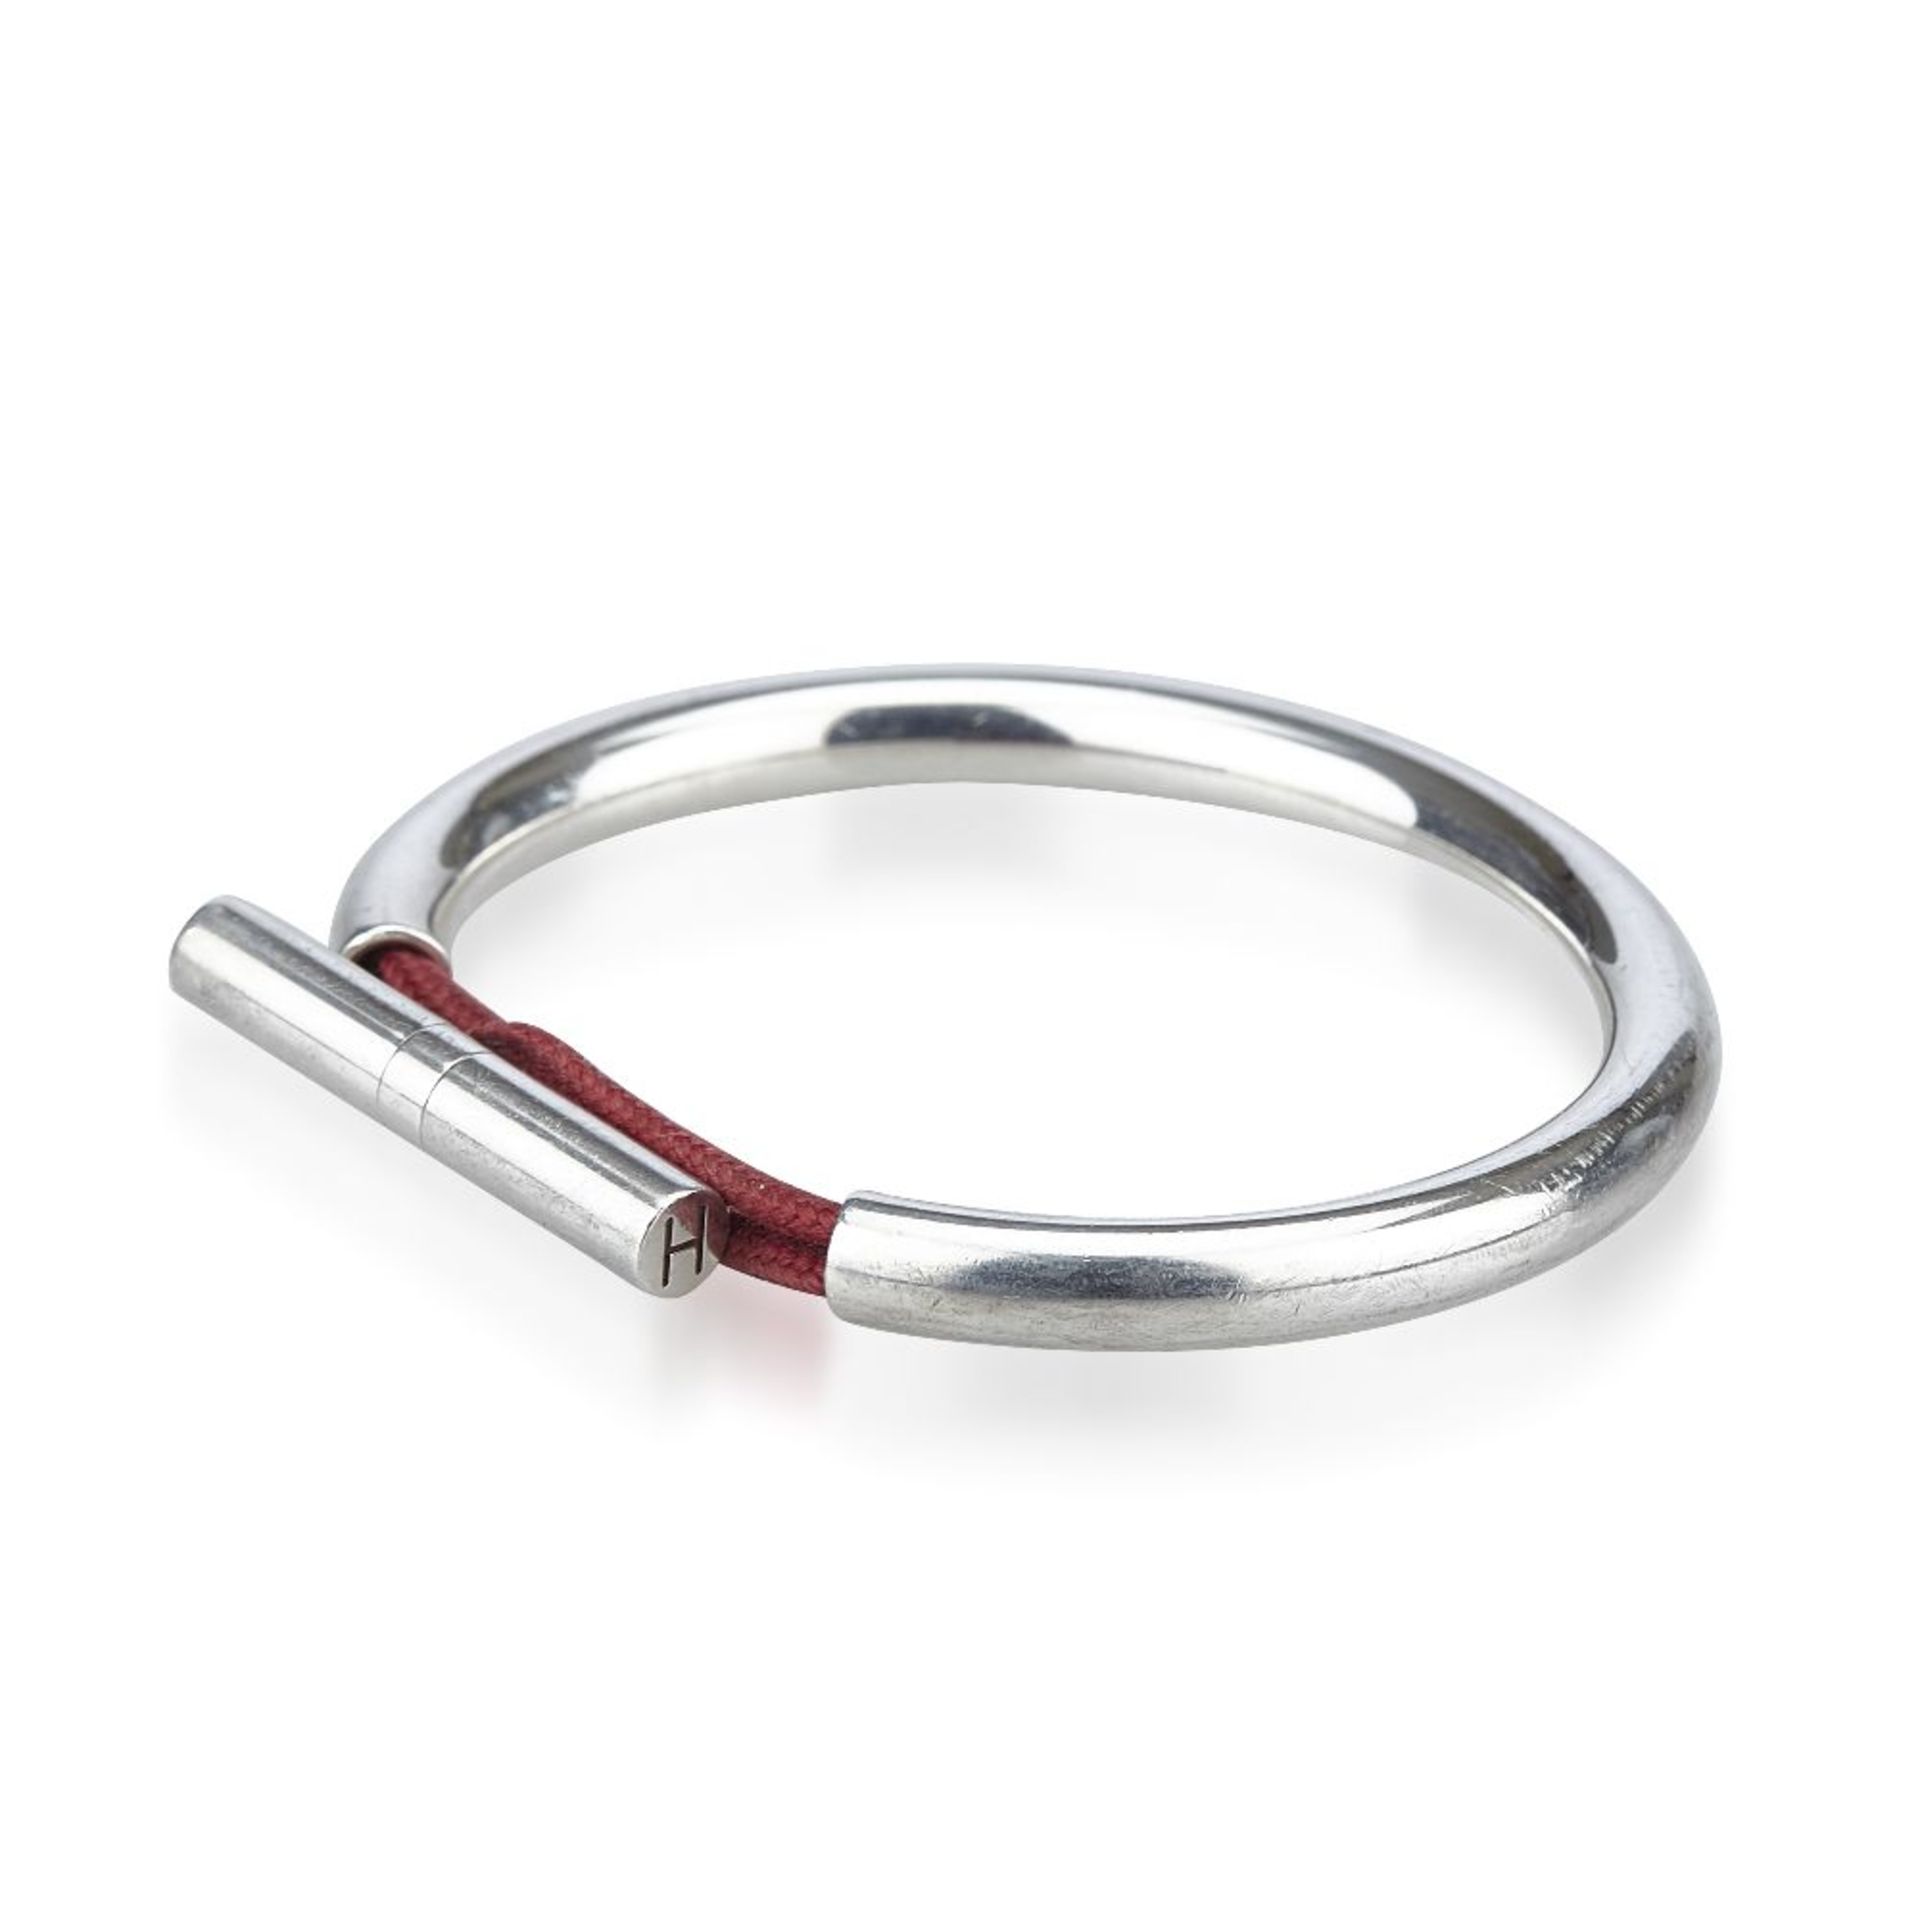 An Hermès 'Skipper' bracelet,featuring a silver and chemical fibre body - Image 2 of 7